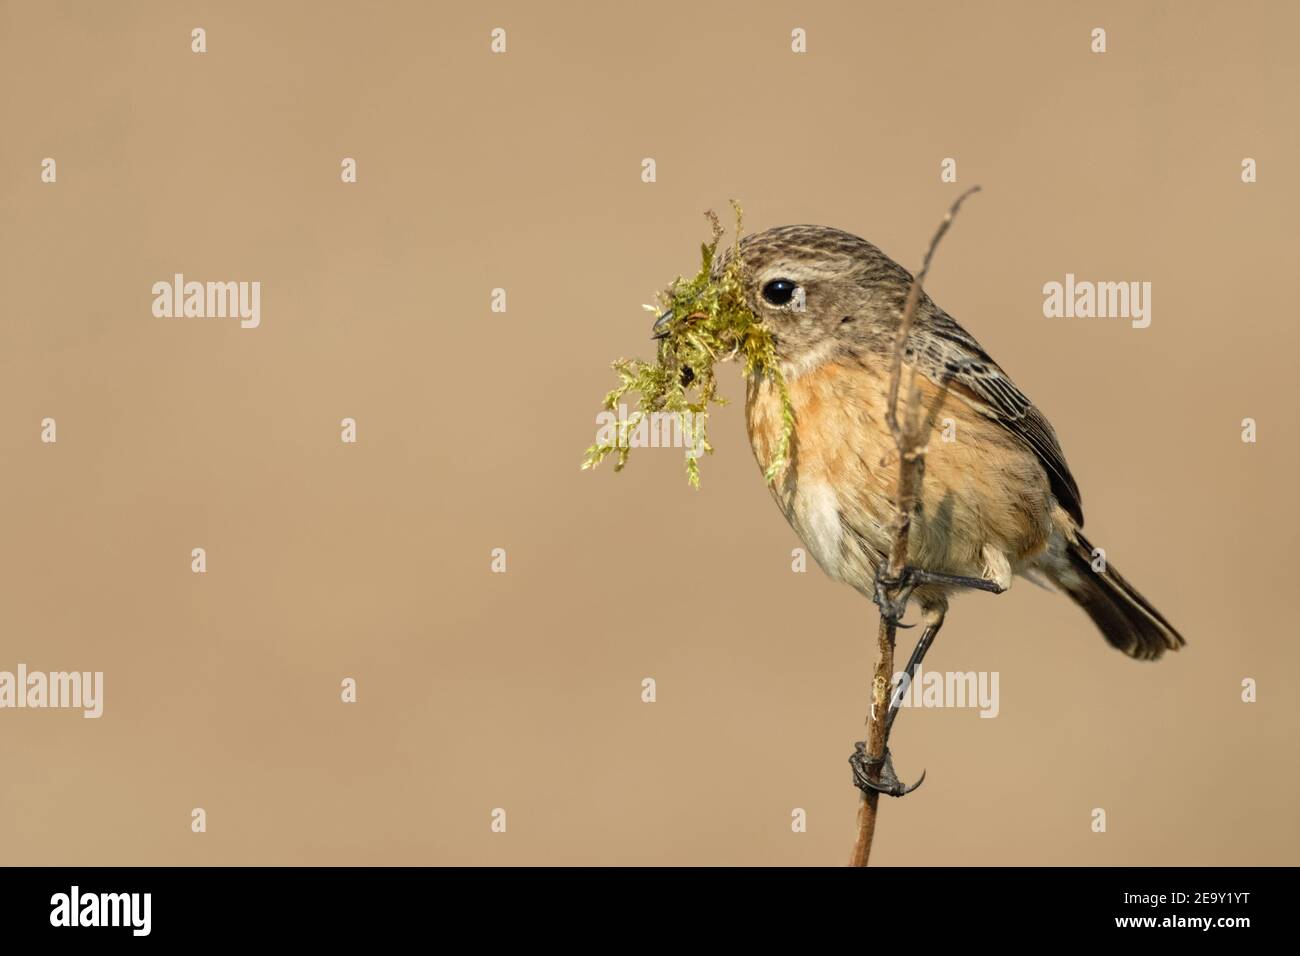 European Stonechat ( Saxicola torquata ), female, perched on top of a little twig with nest material in its beak, watching, wildlife, Europe. Stock Photo